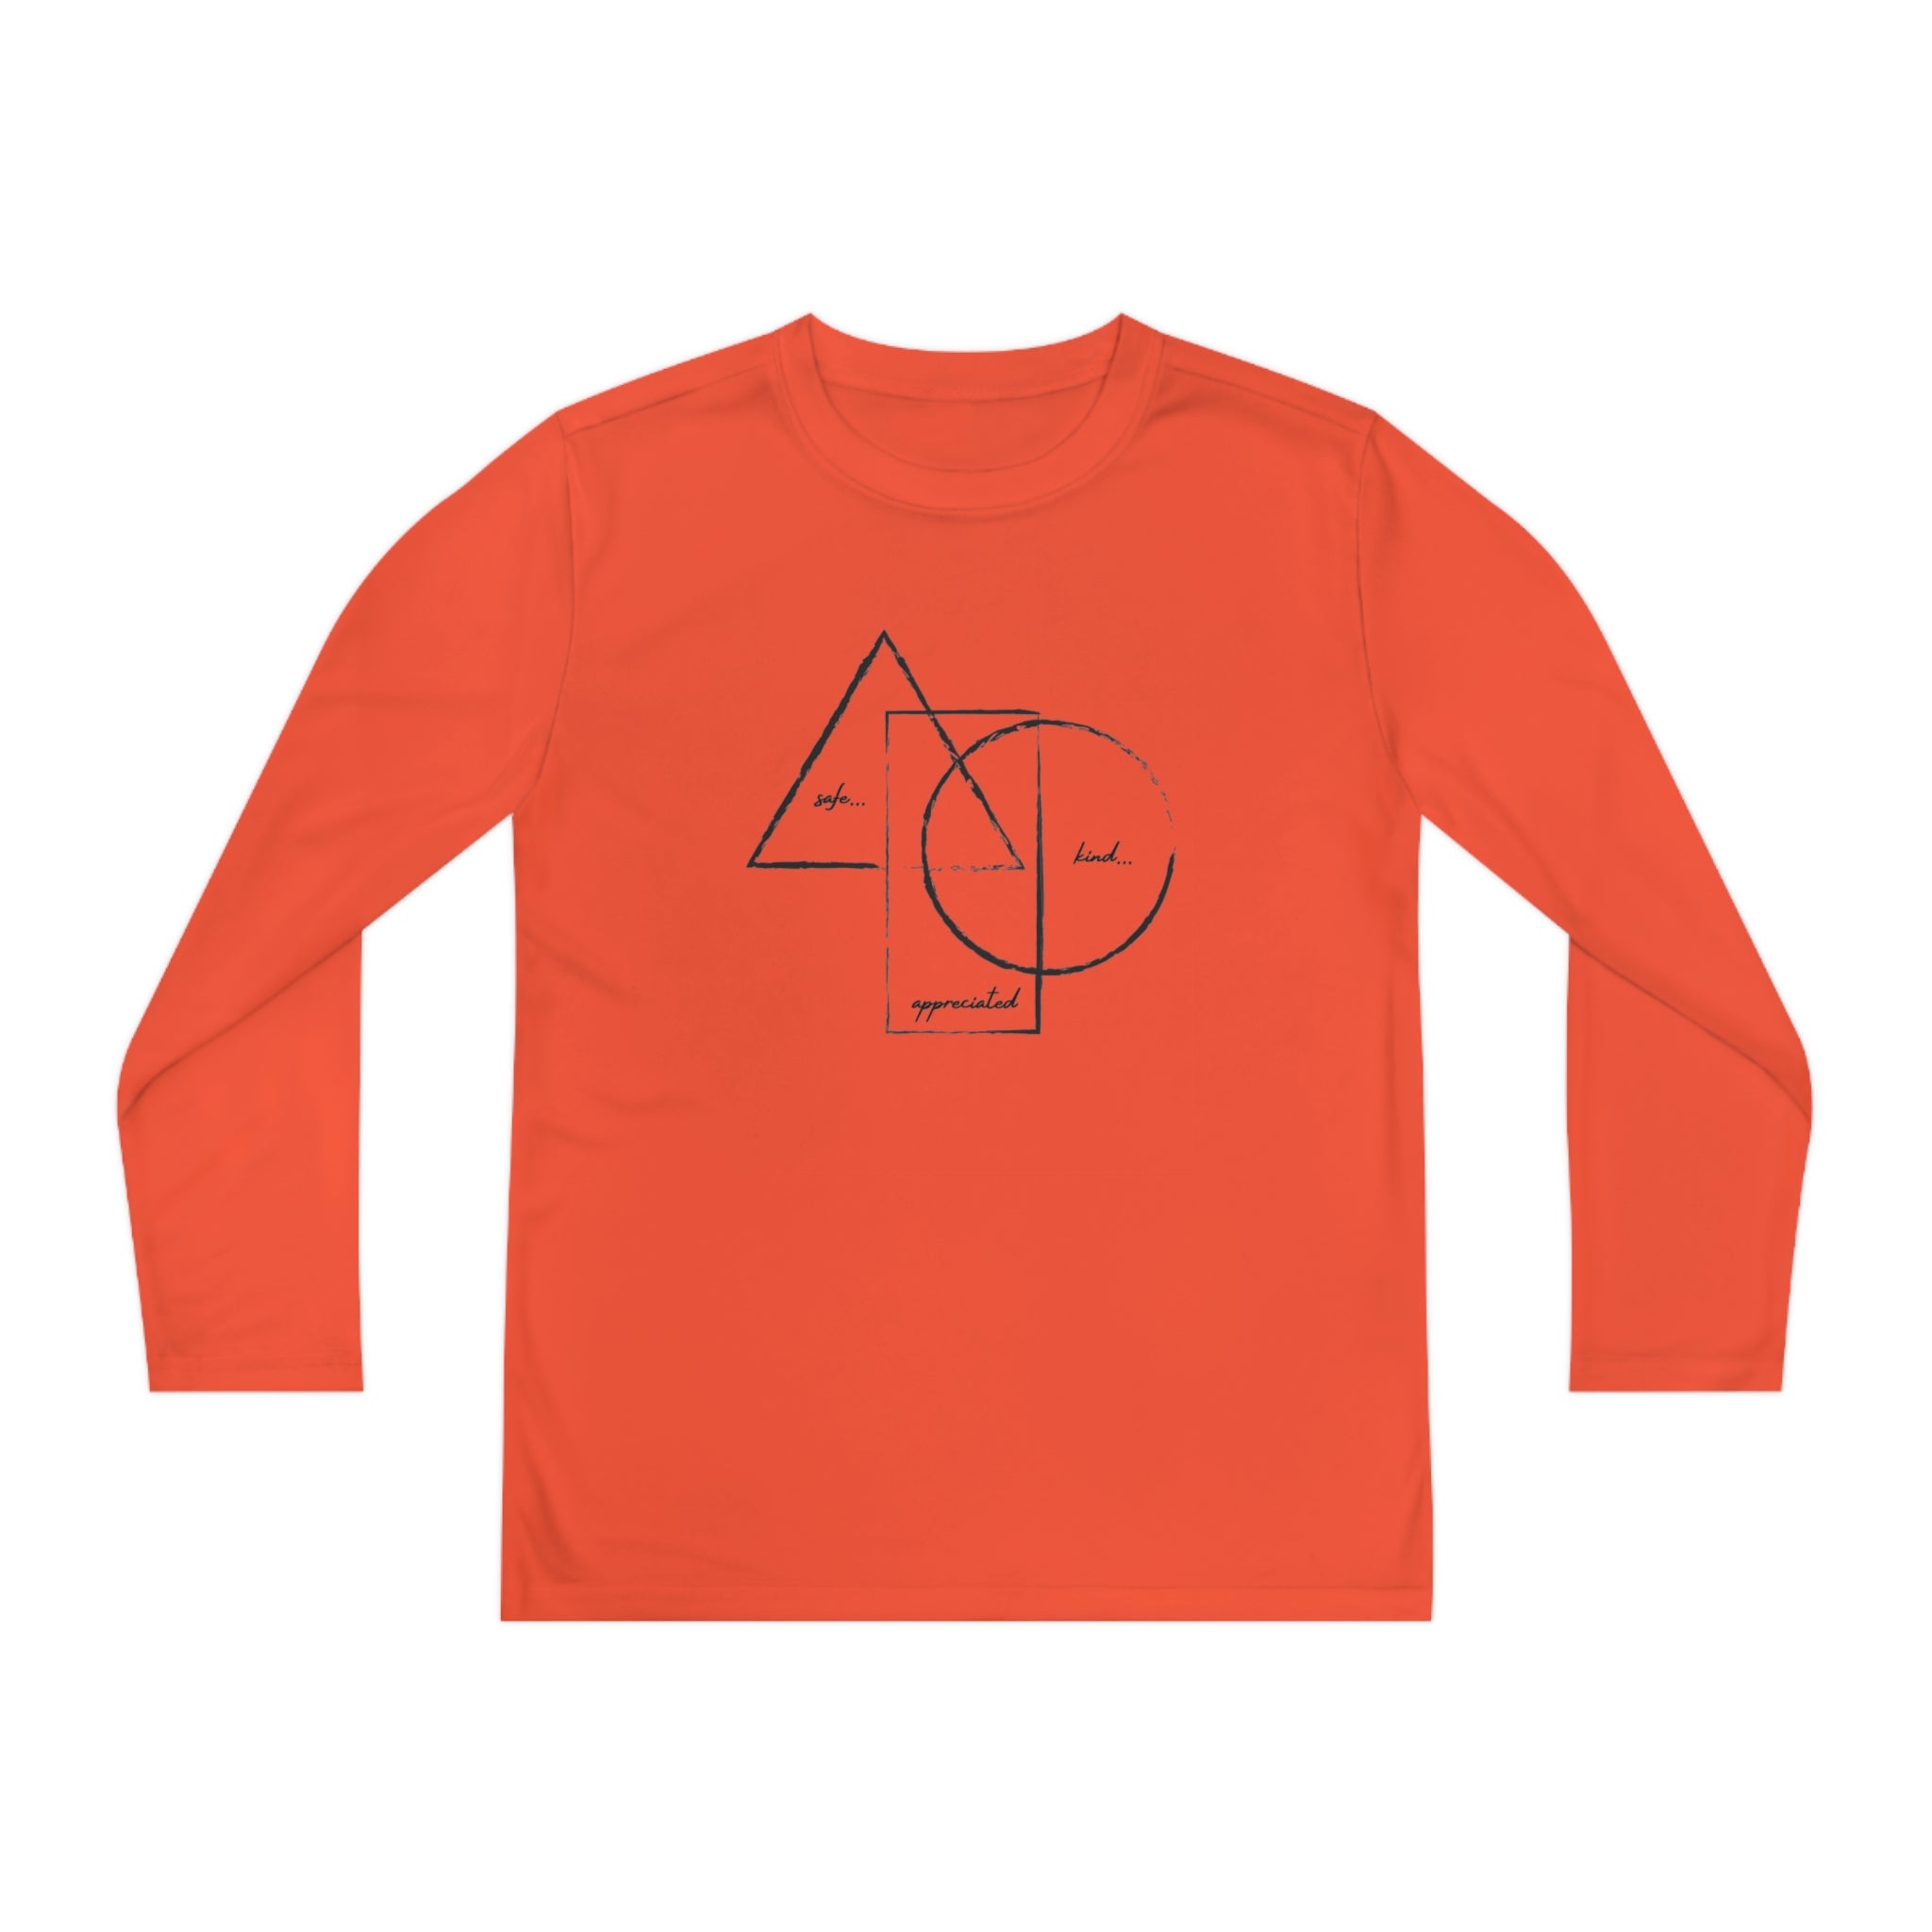 BE/KNOW Youth Long Sleeve Competitor Tee